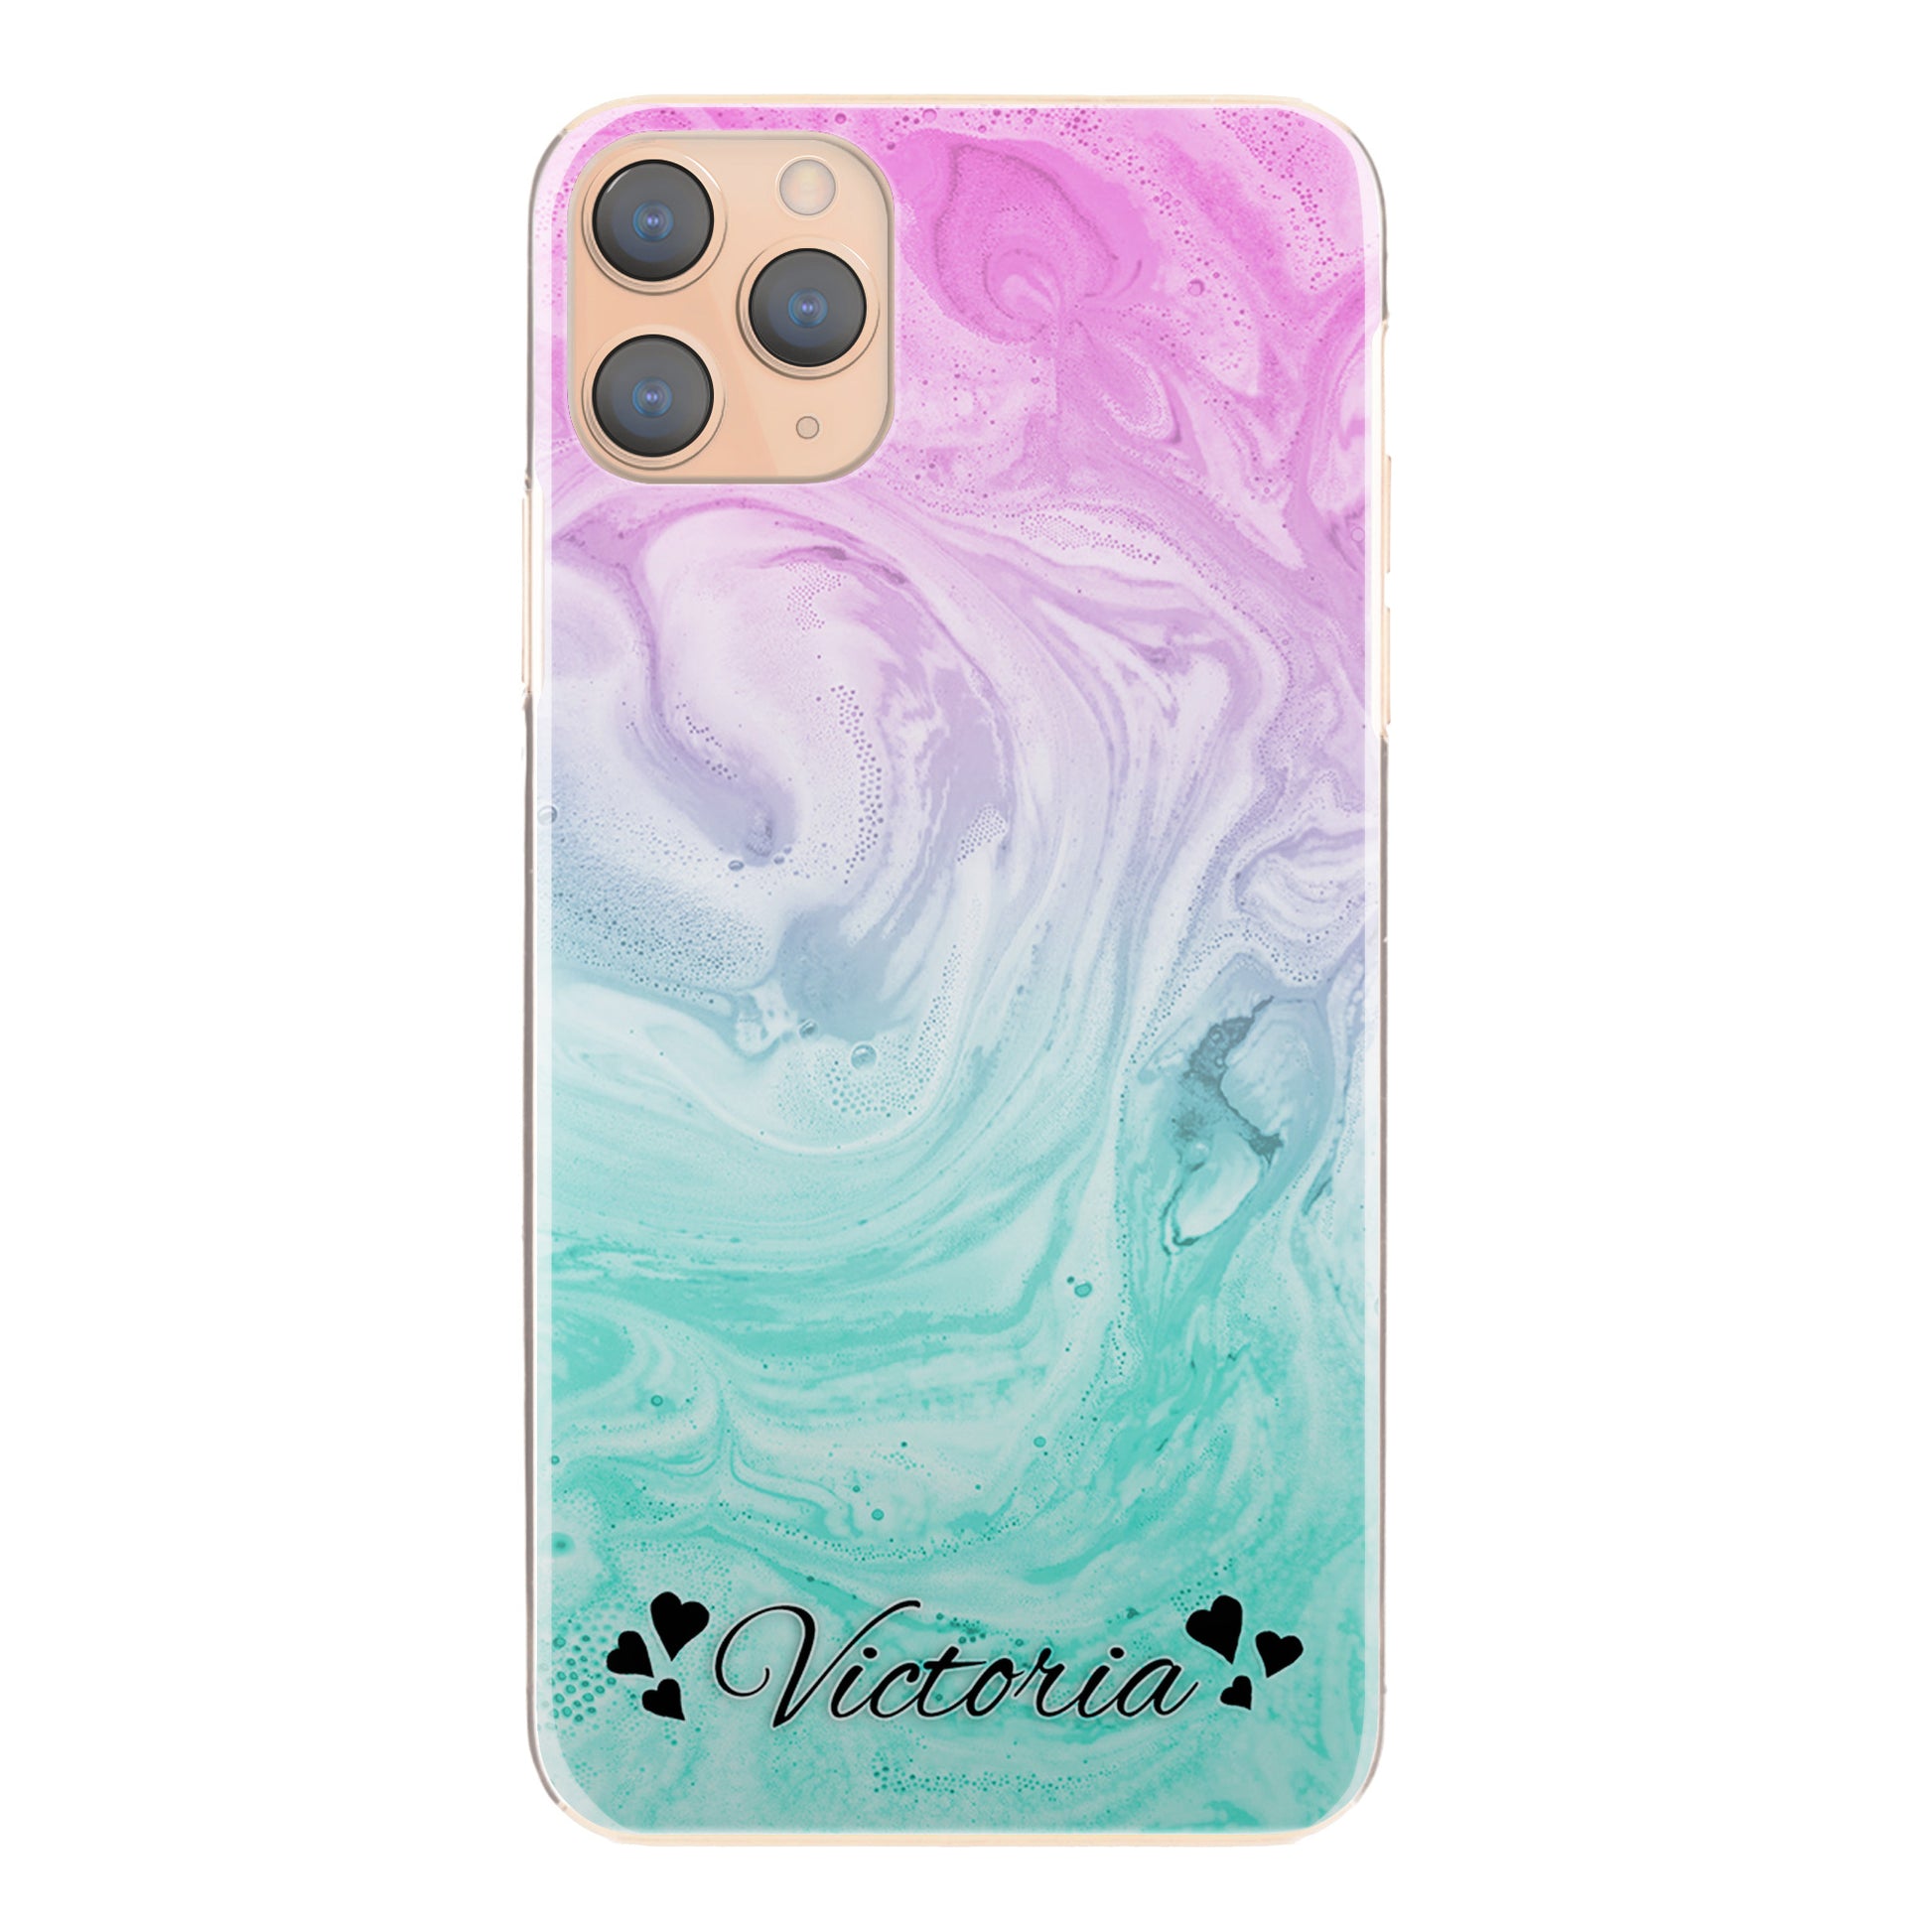 Personalised Motorola Phone Hard Case with Heart Styled Text on Cyan Magenta Gradient Swirled Marble